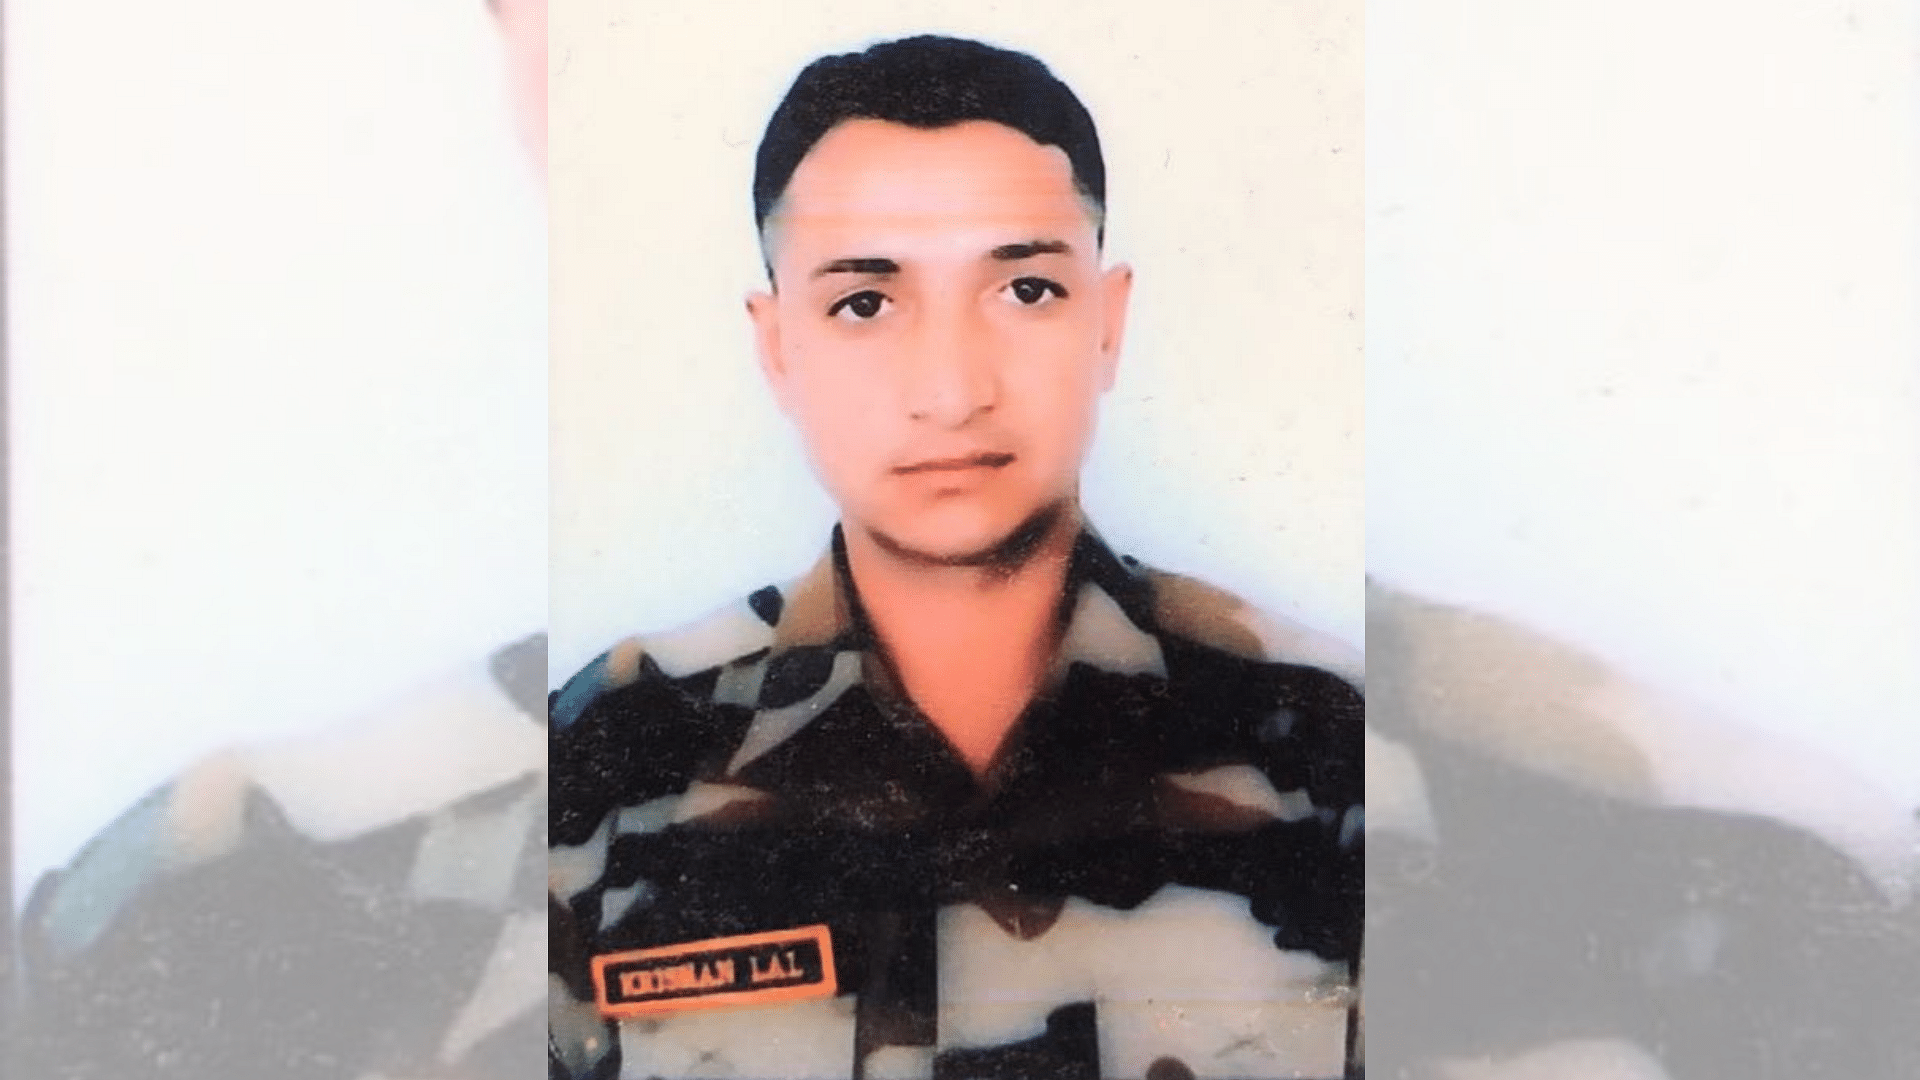 34-year-old Naik Krishan Lal died in the ceasefire violation along LoC